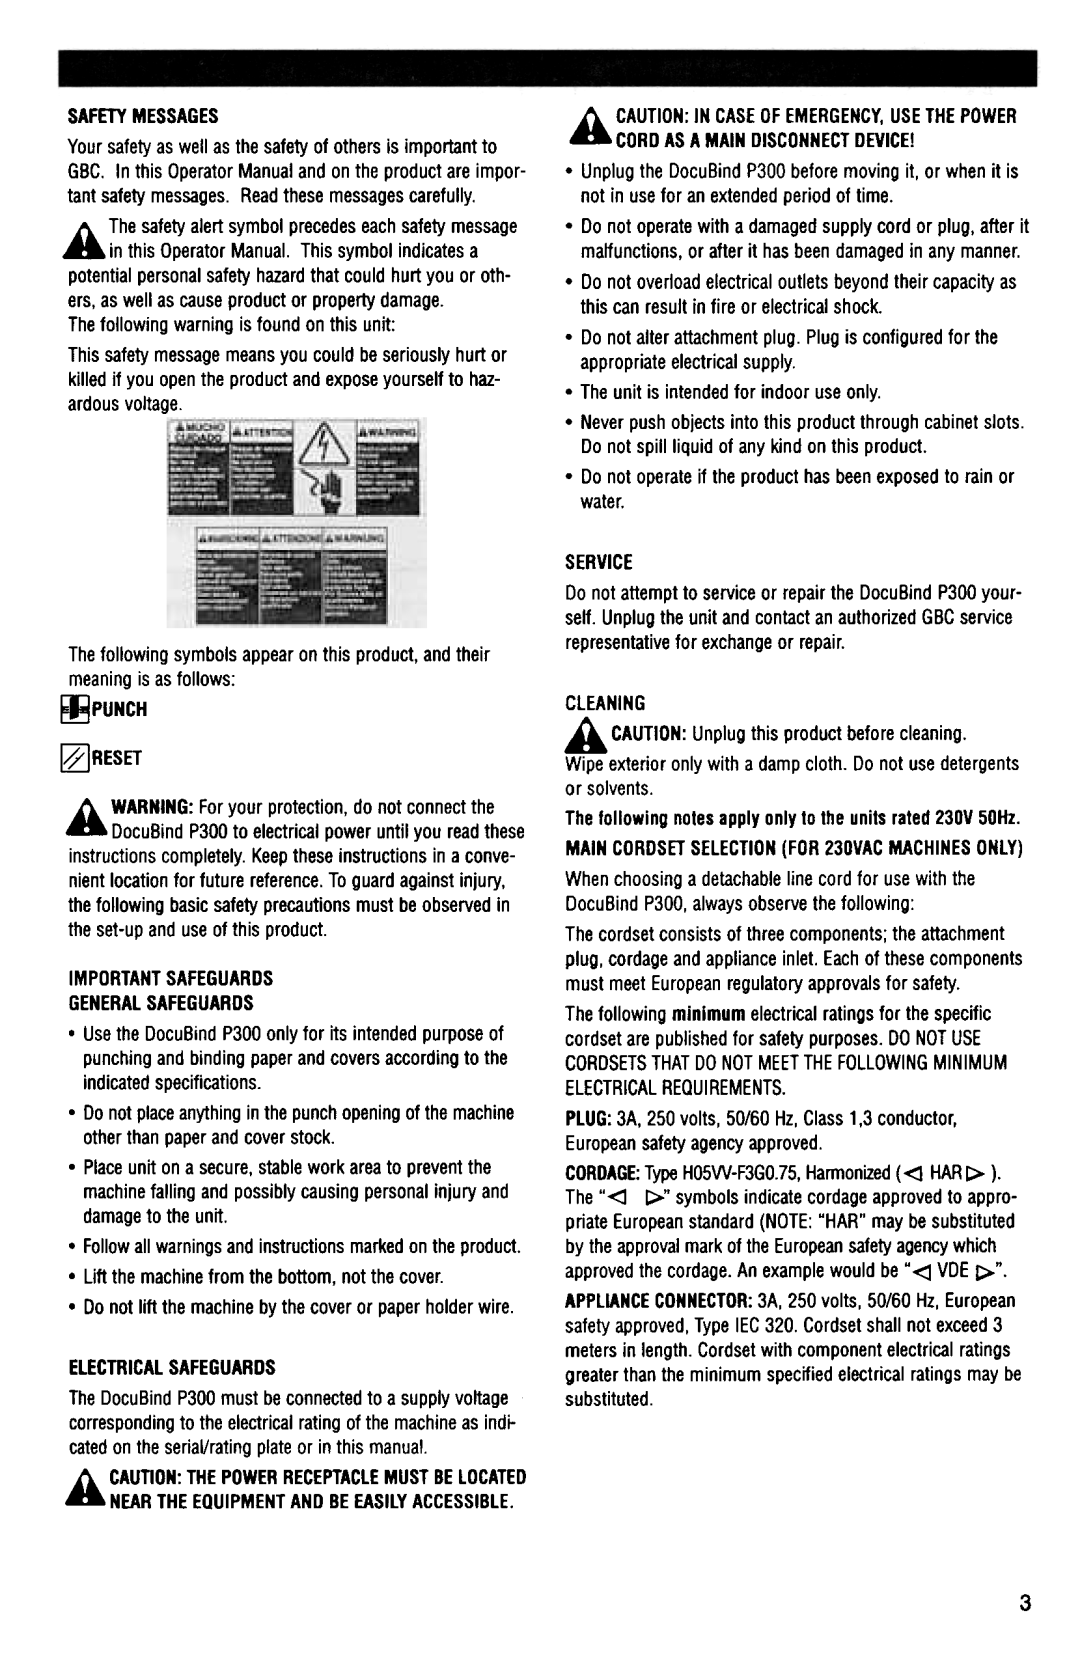 GBC P300 manual Safetymessages 